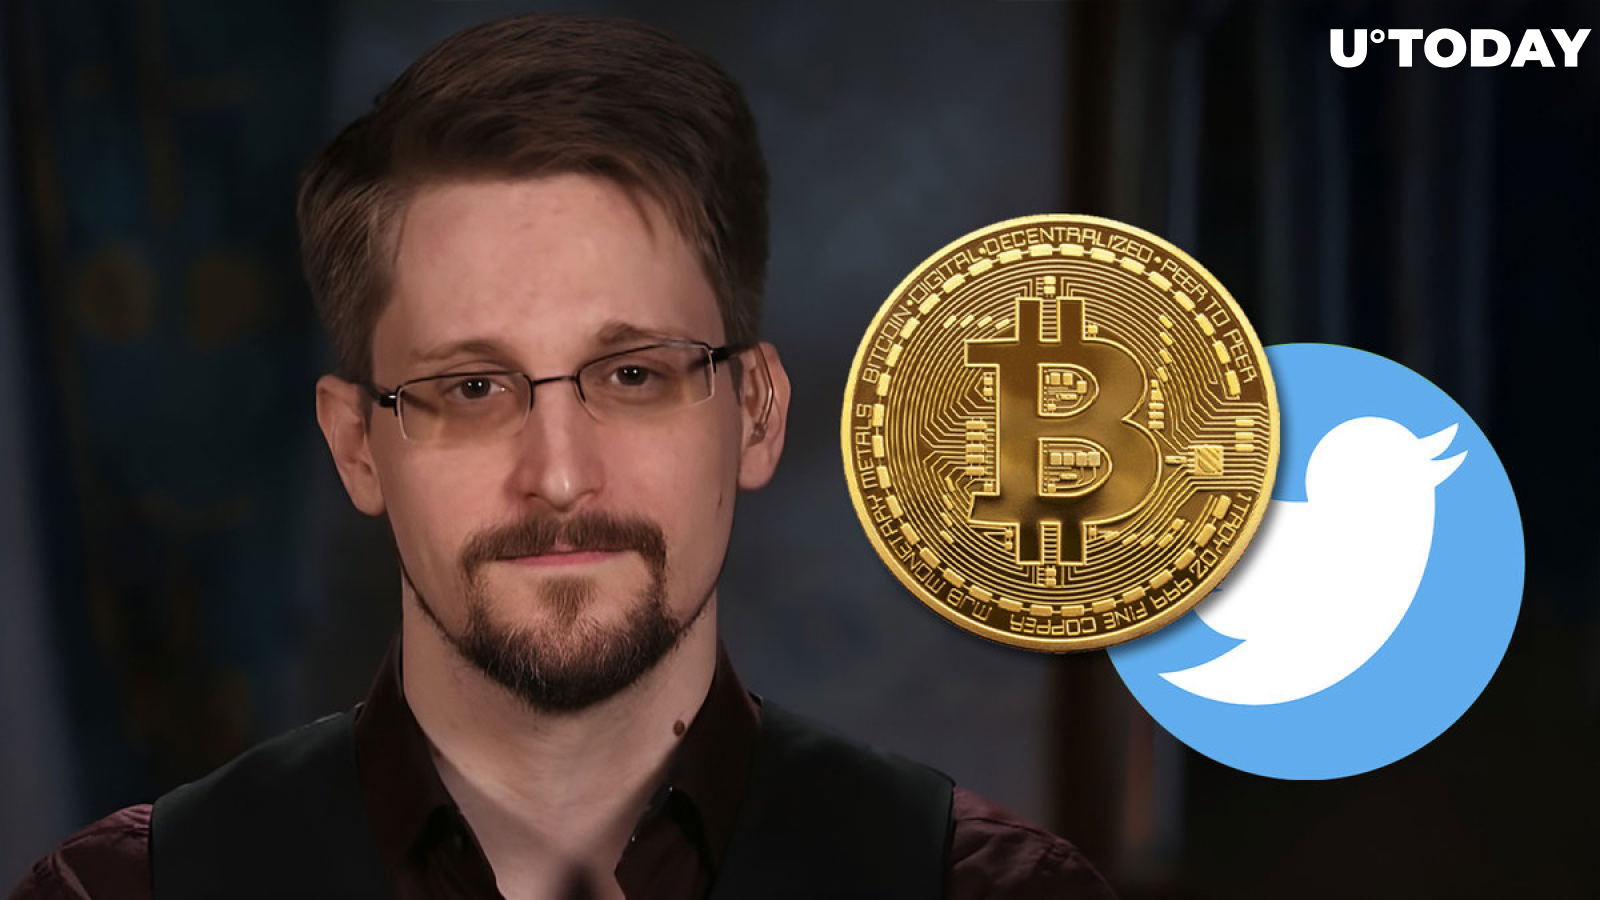 Edward Snowden Says He'll Take Bitcoin for Becoming Twitter CEO